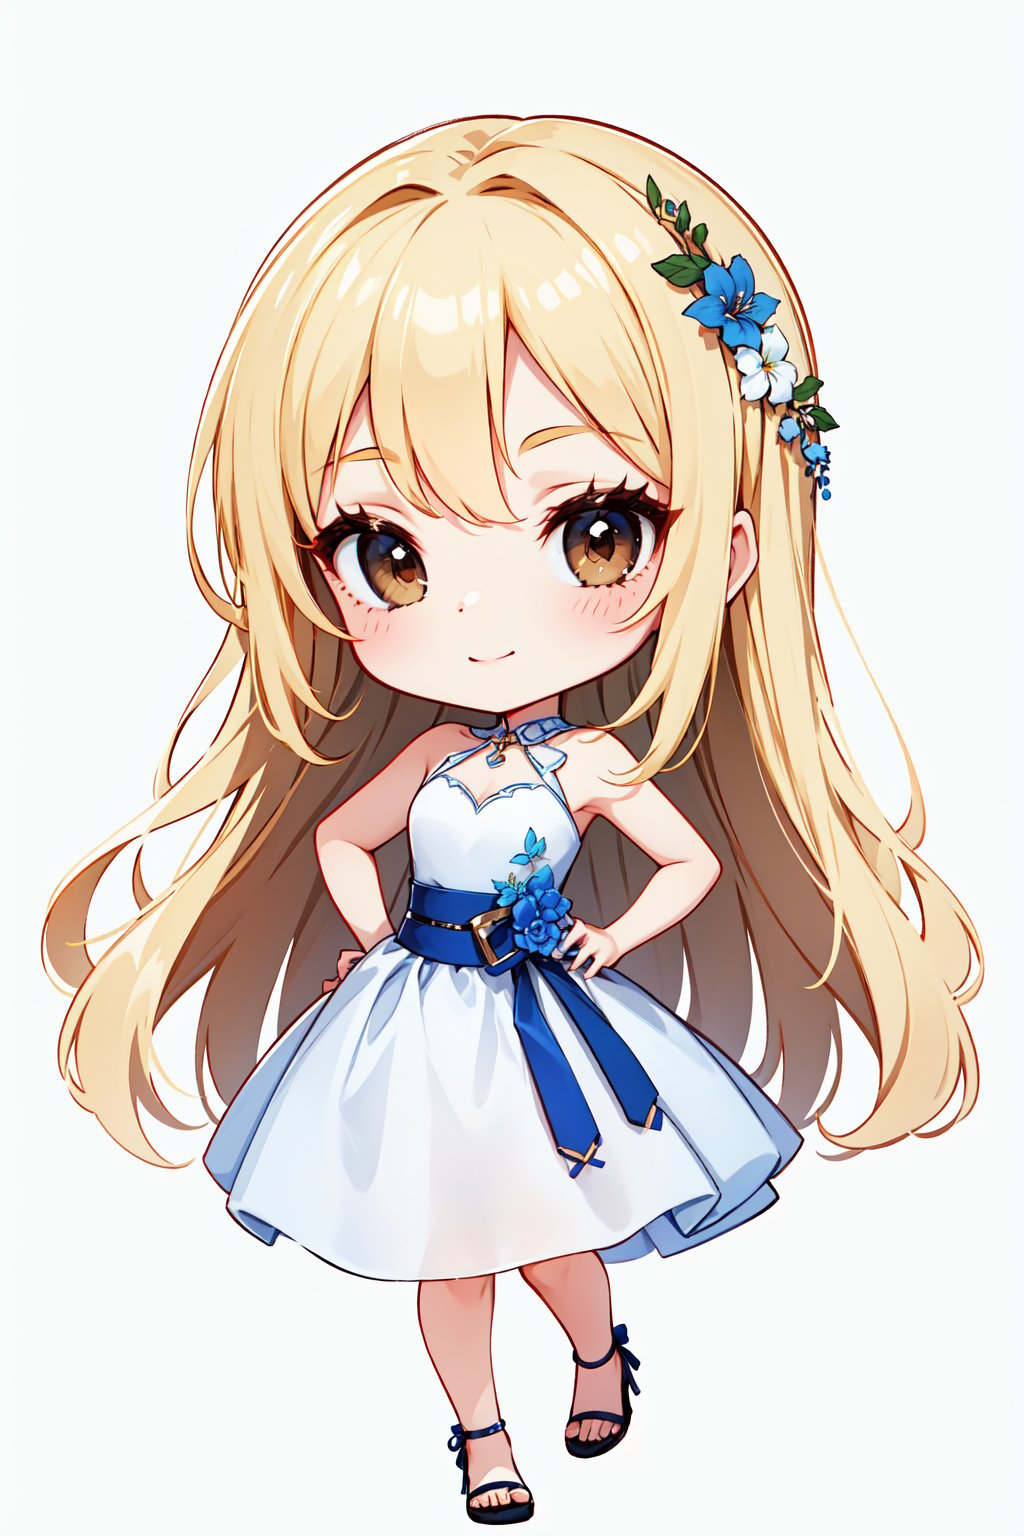 Cute girl, White background, full body image, masterpiece quality, stunning image, beautiful blonde hair, detailed image, one hand on the waist, modern evening dress outfit. Chibi